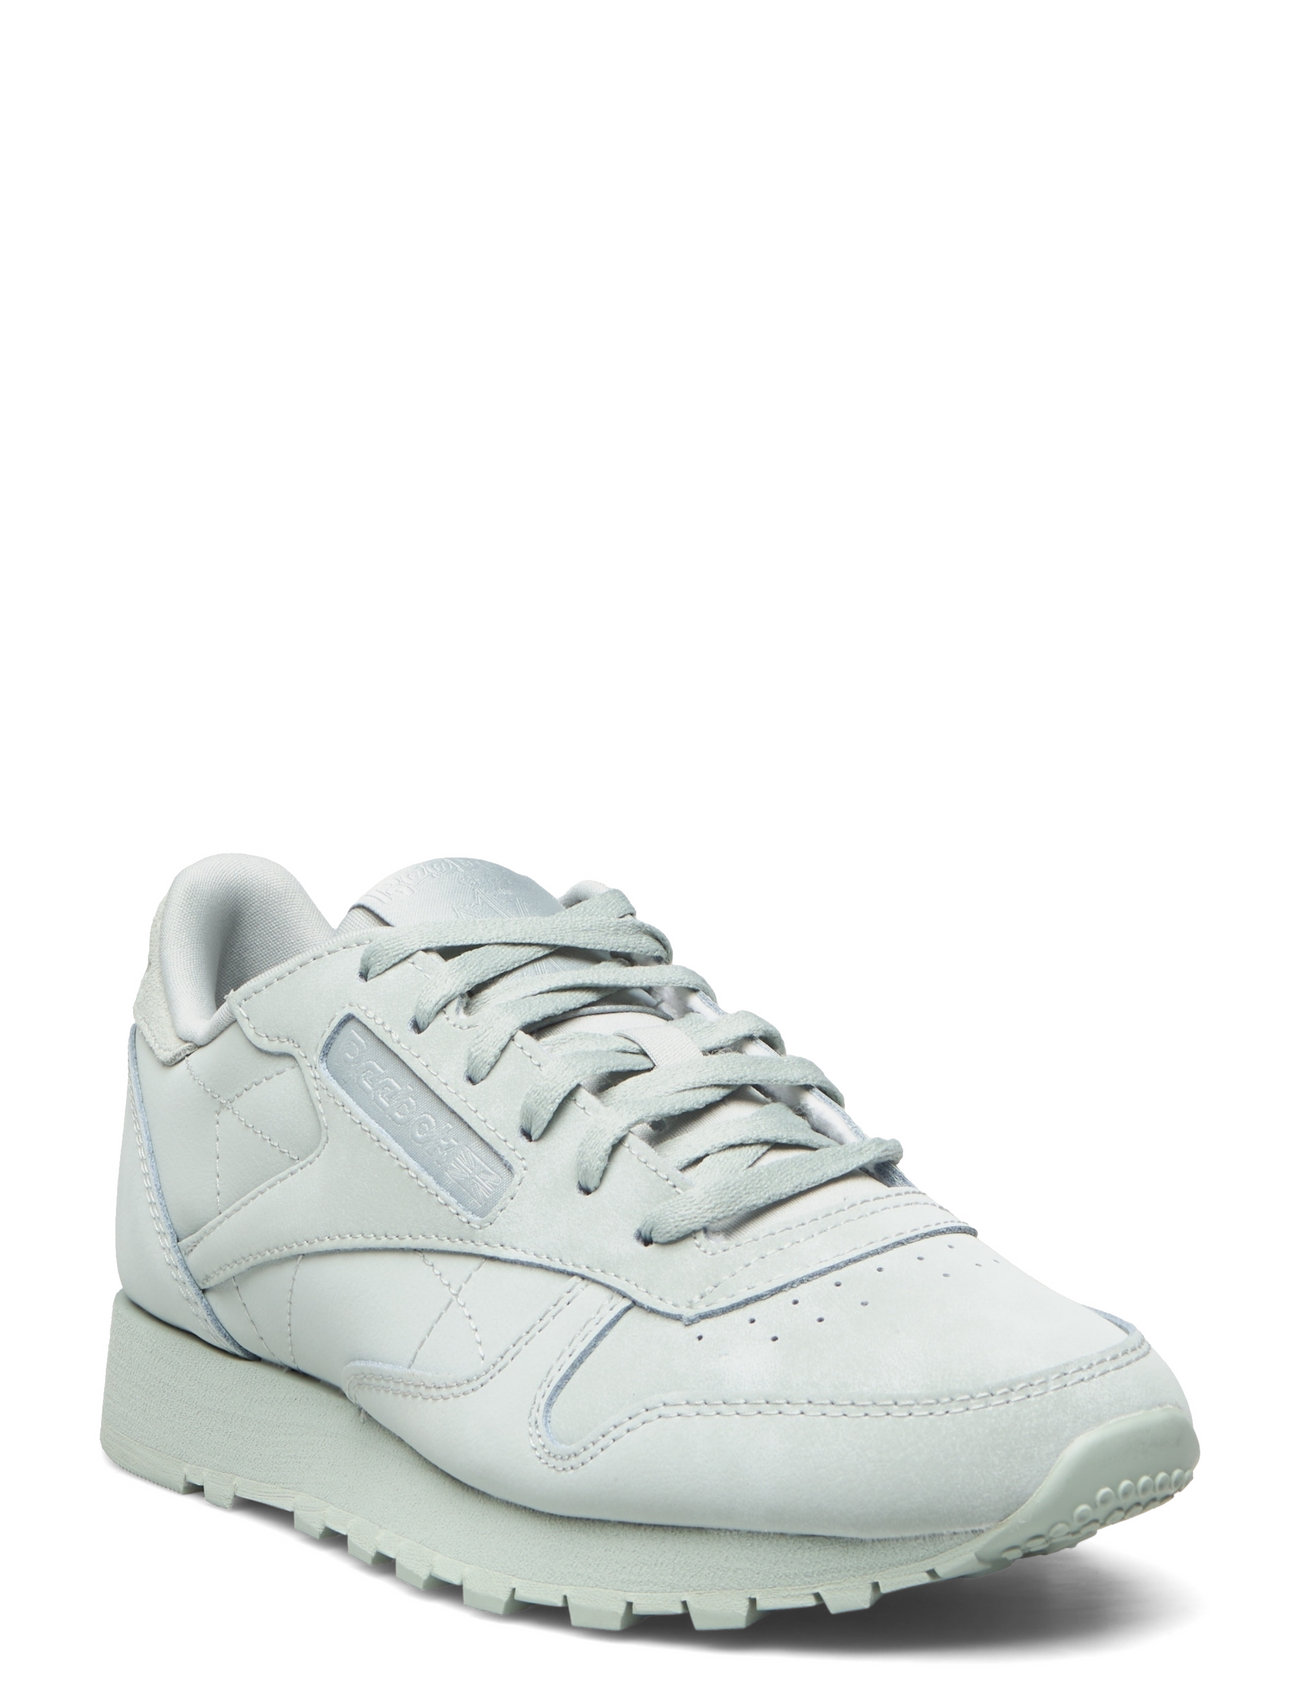 Danmark køre Flad Reebok Classics Classic Leather Shoes - Low top sneakers - Boozt.com